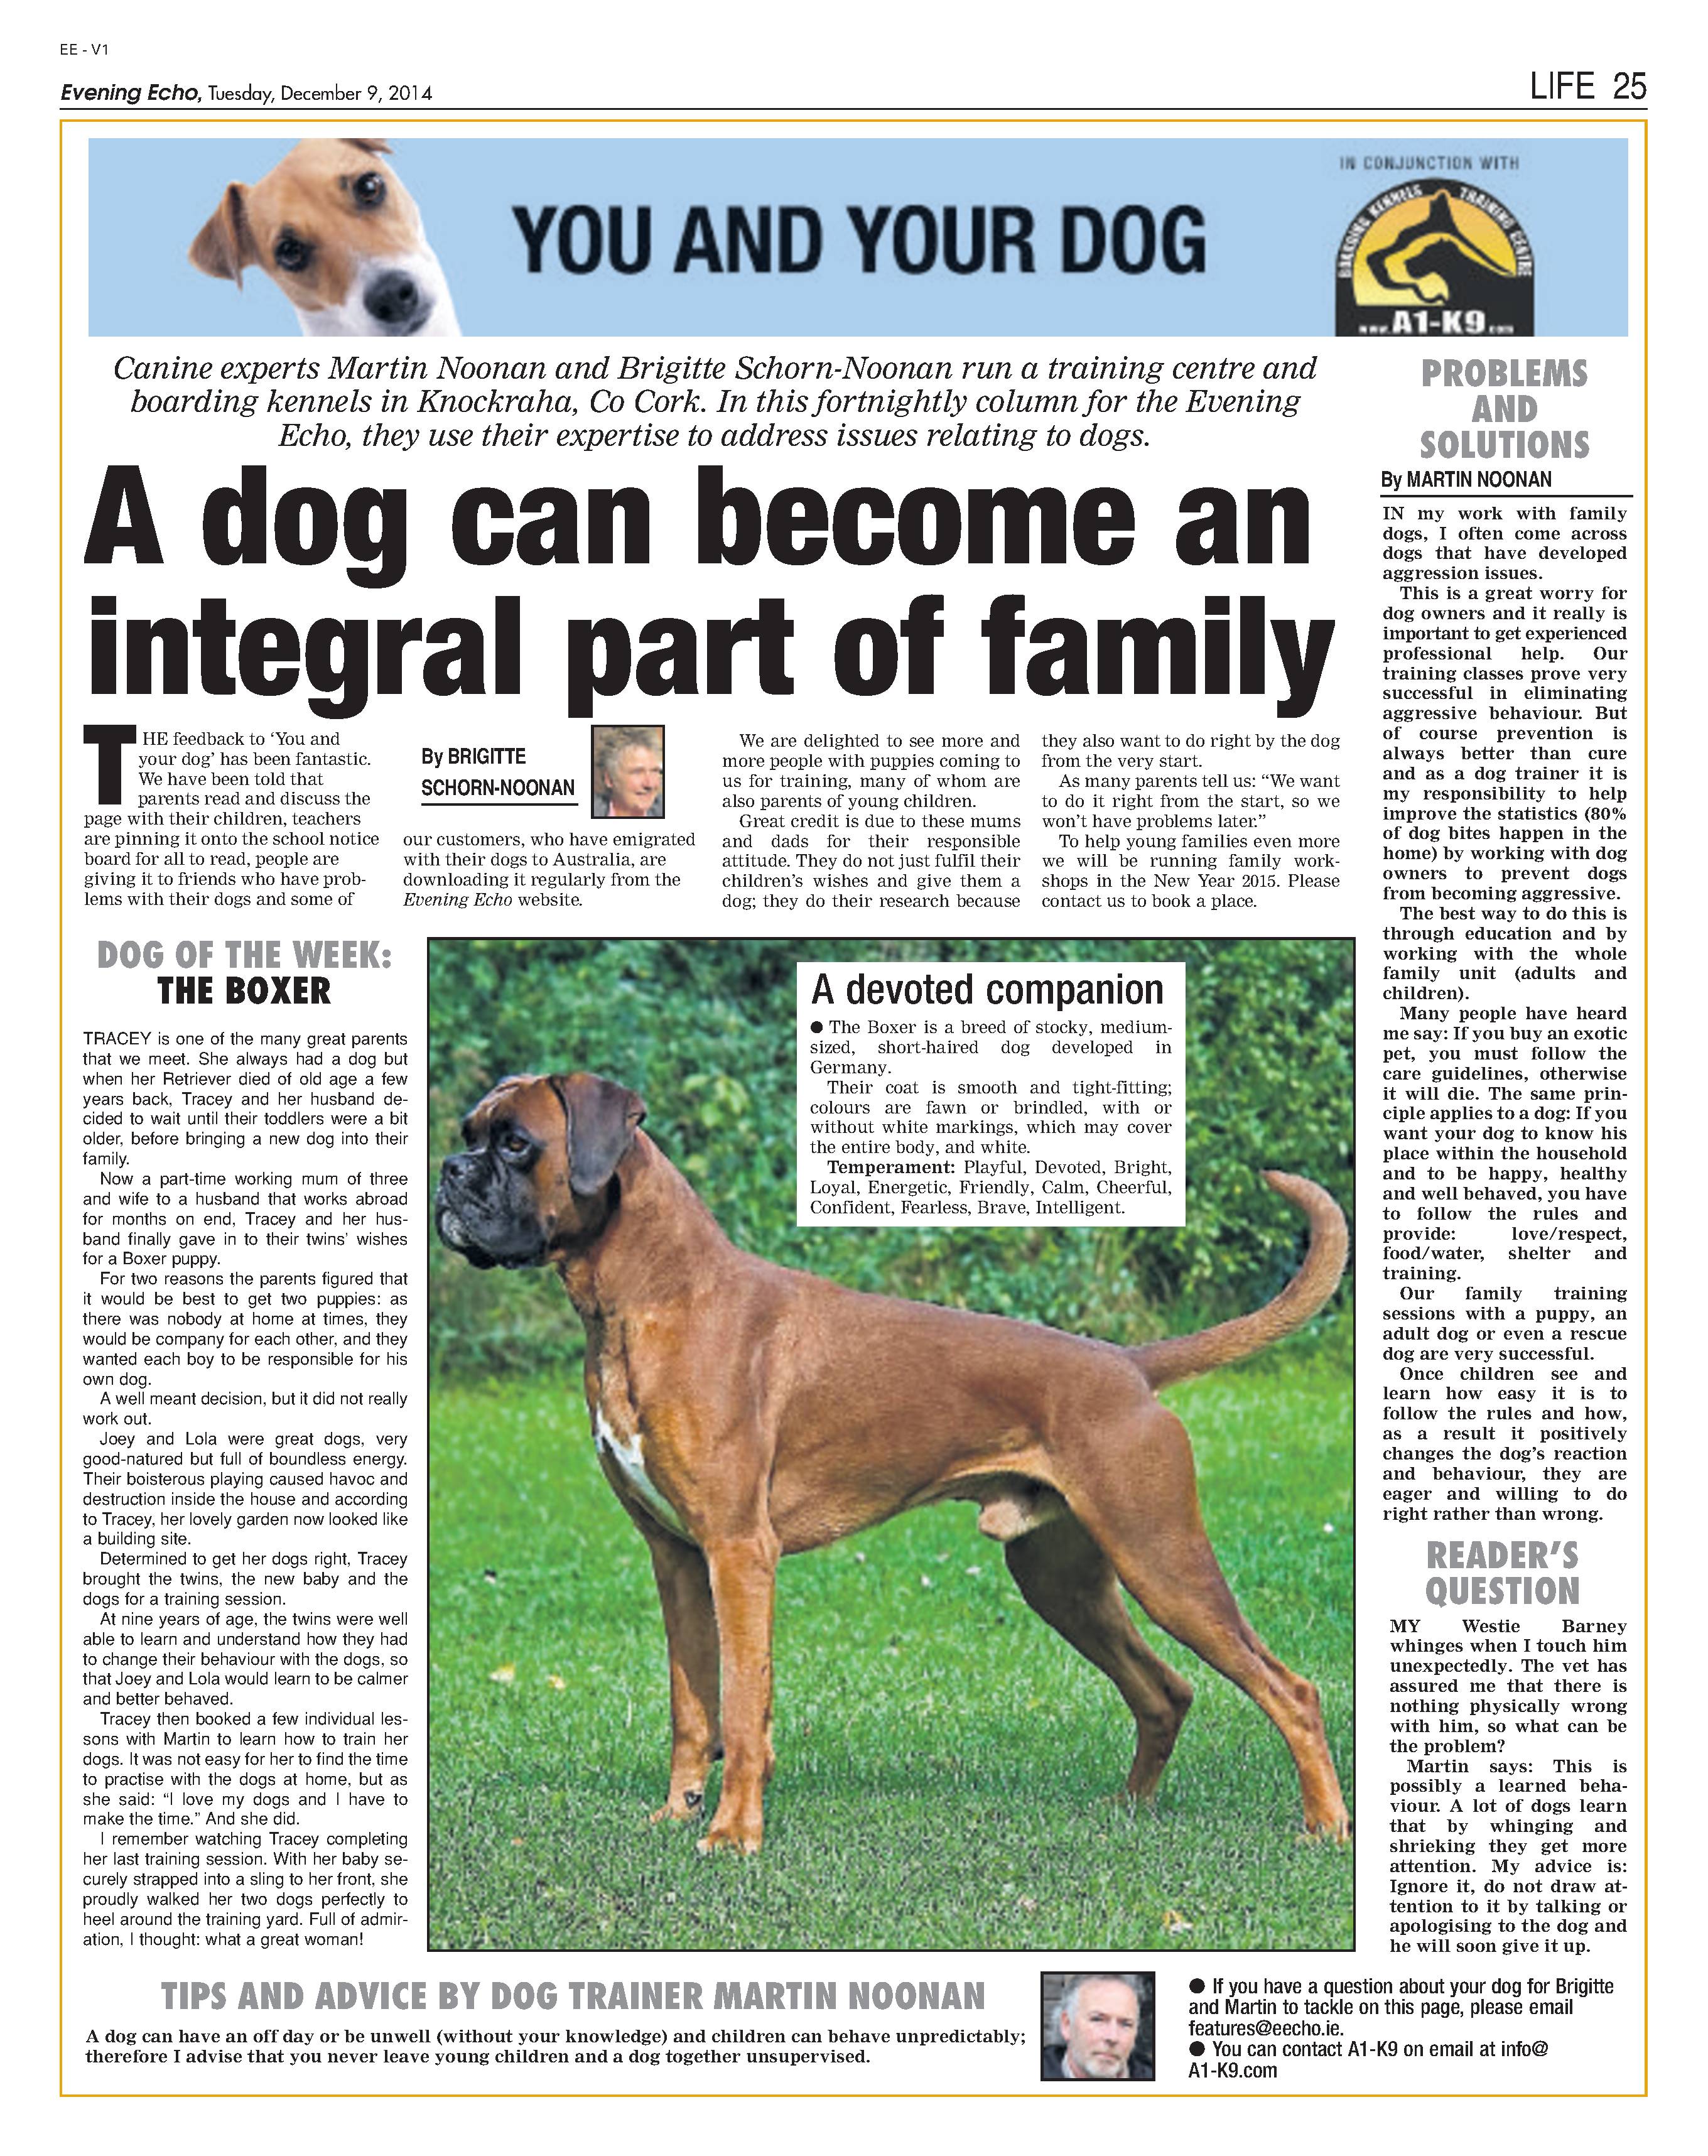 A1K9 Boarding Kennels and Training Centre Articles